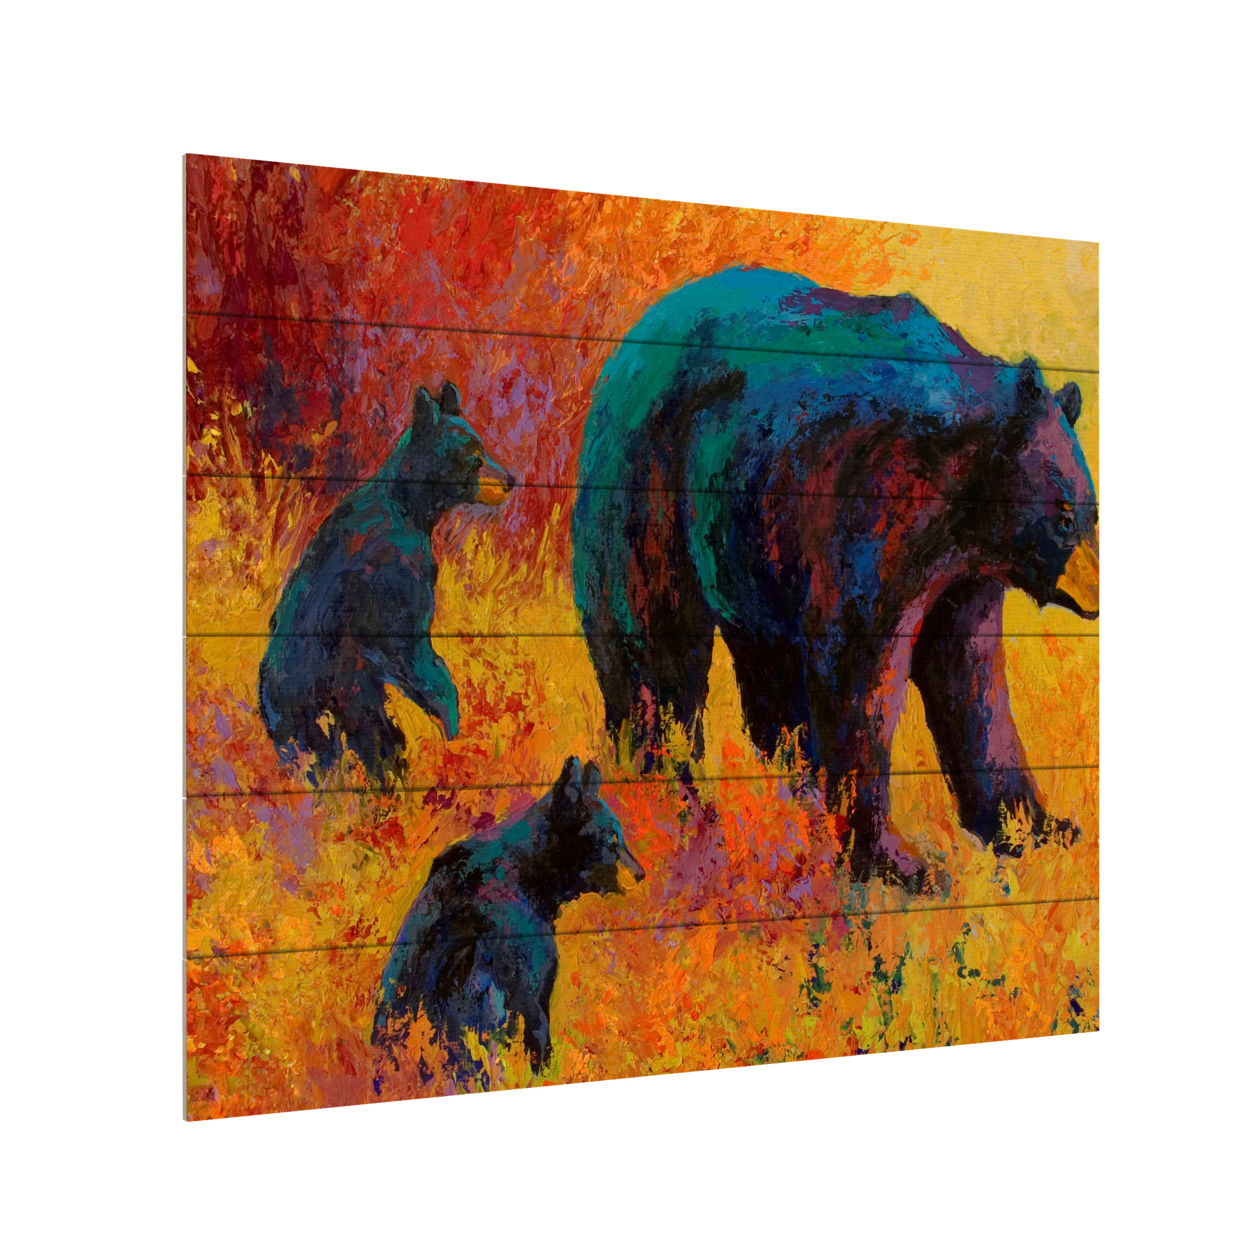 Wooden Slat Art 18 X 22 Inches Titled Double Trouble Black Bear Ready To Hang Home Decor Picture